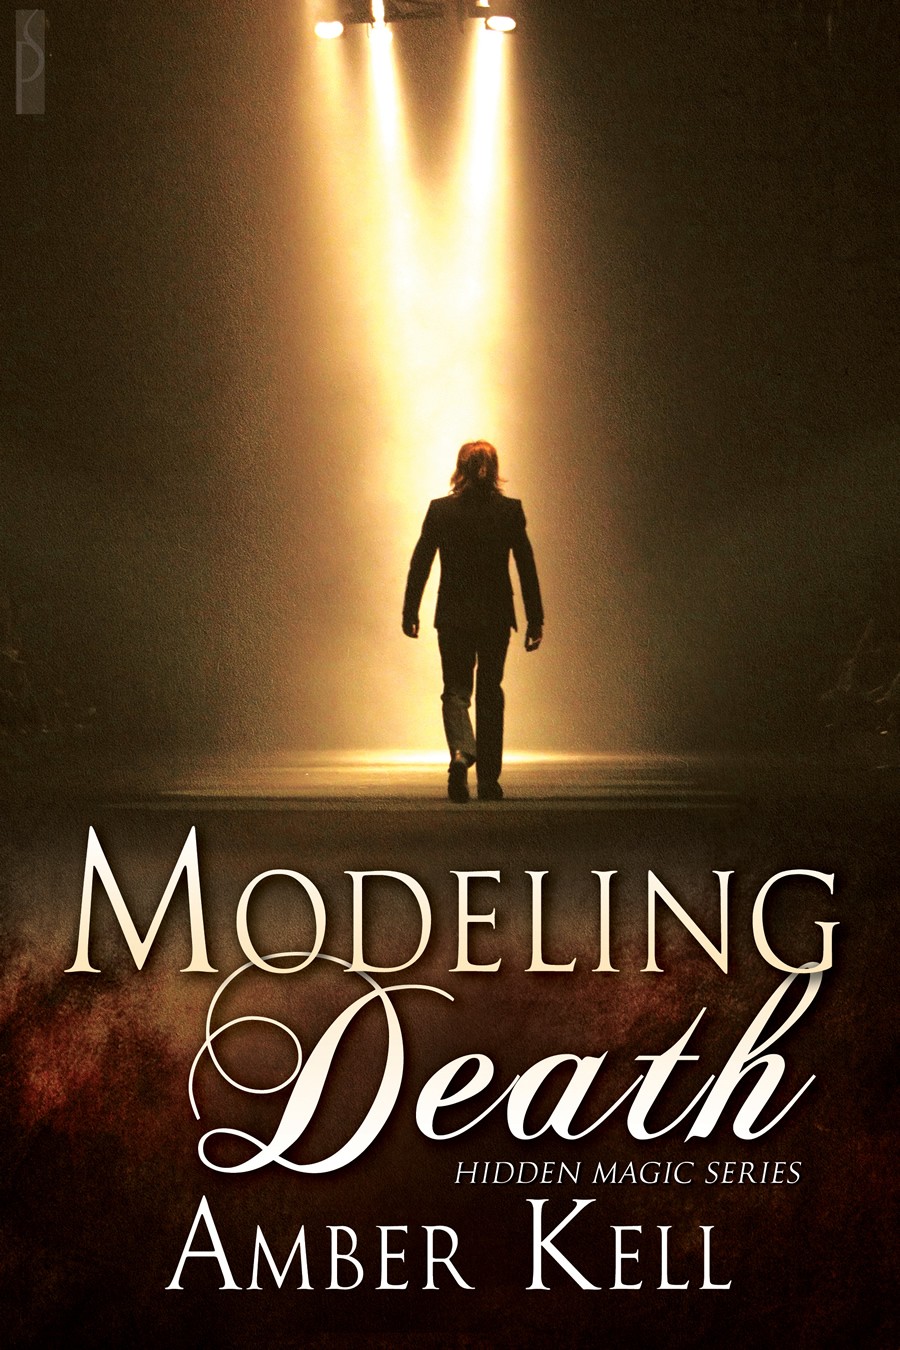 Modeling Death (2011) by Amber Kell